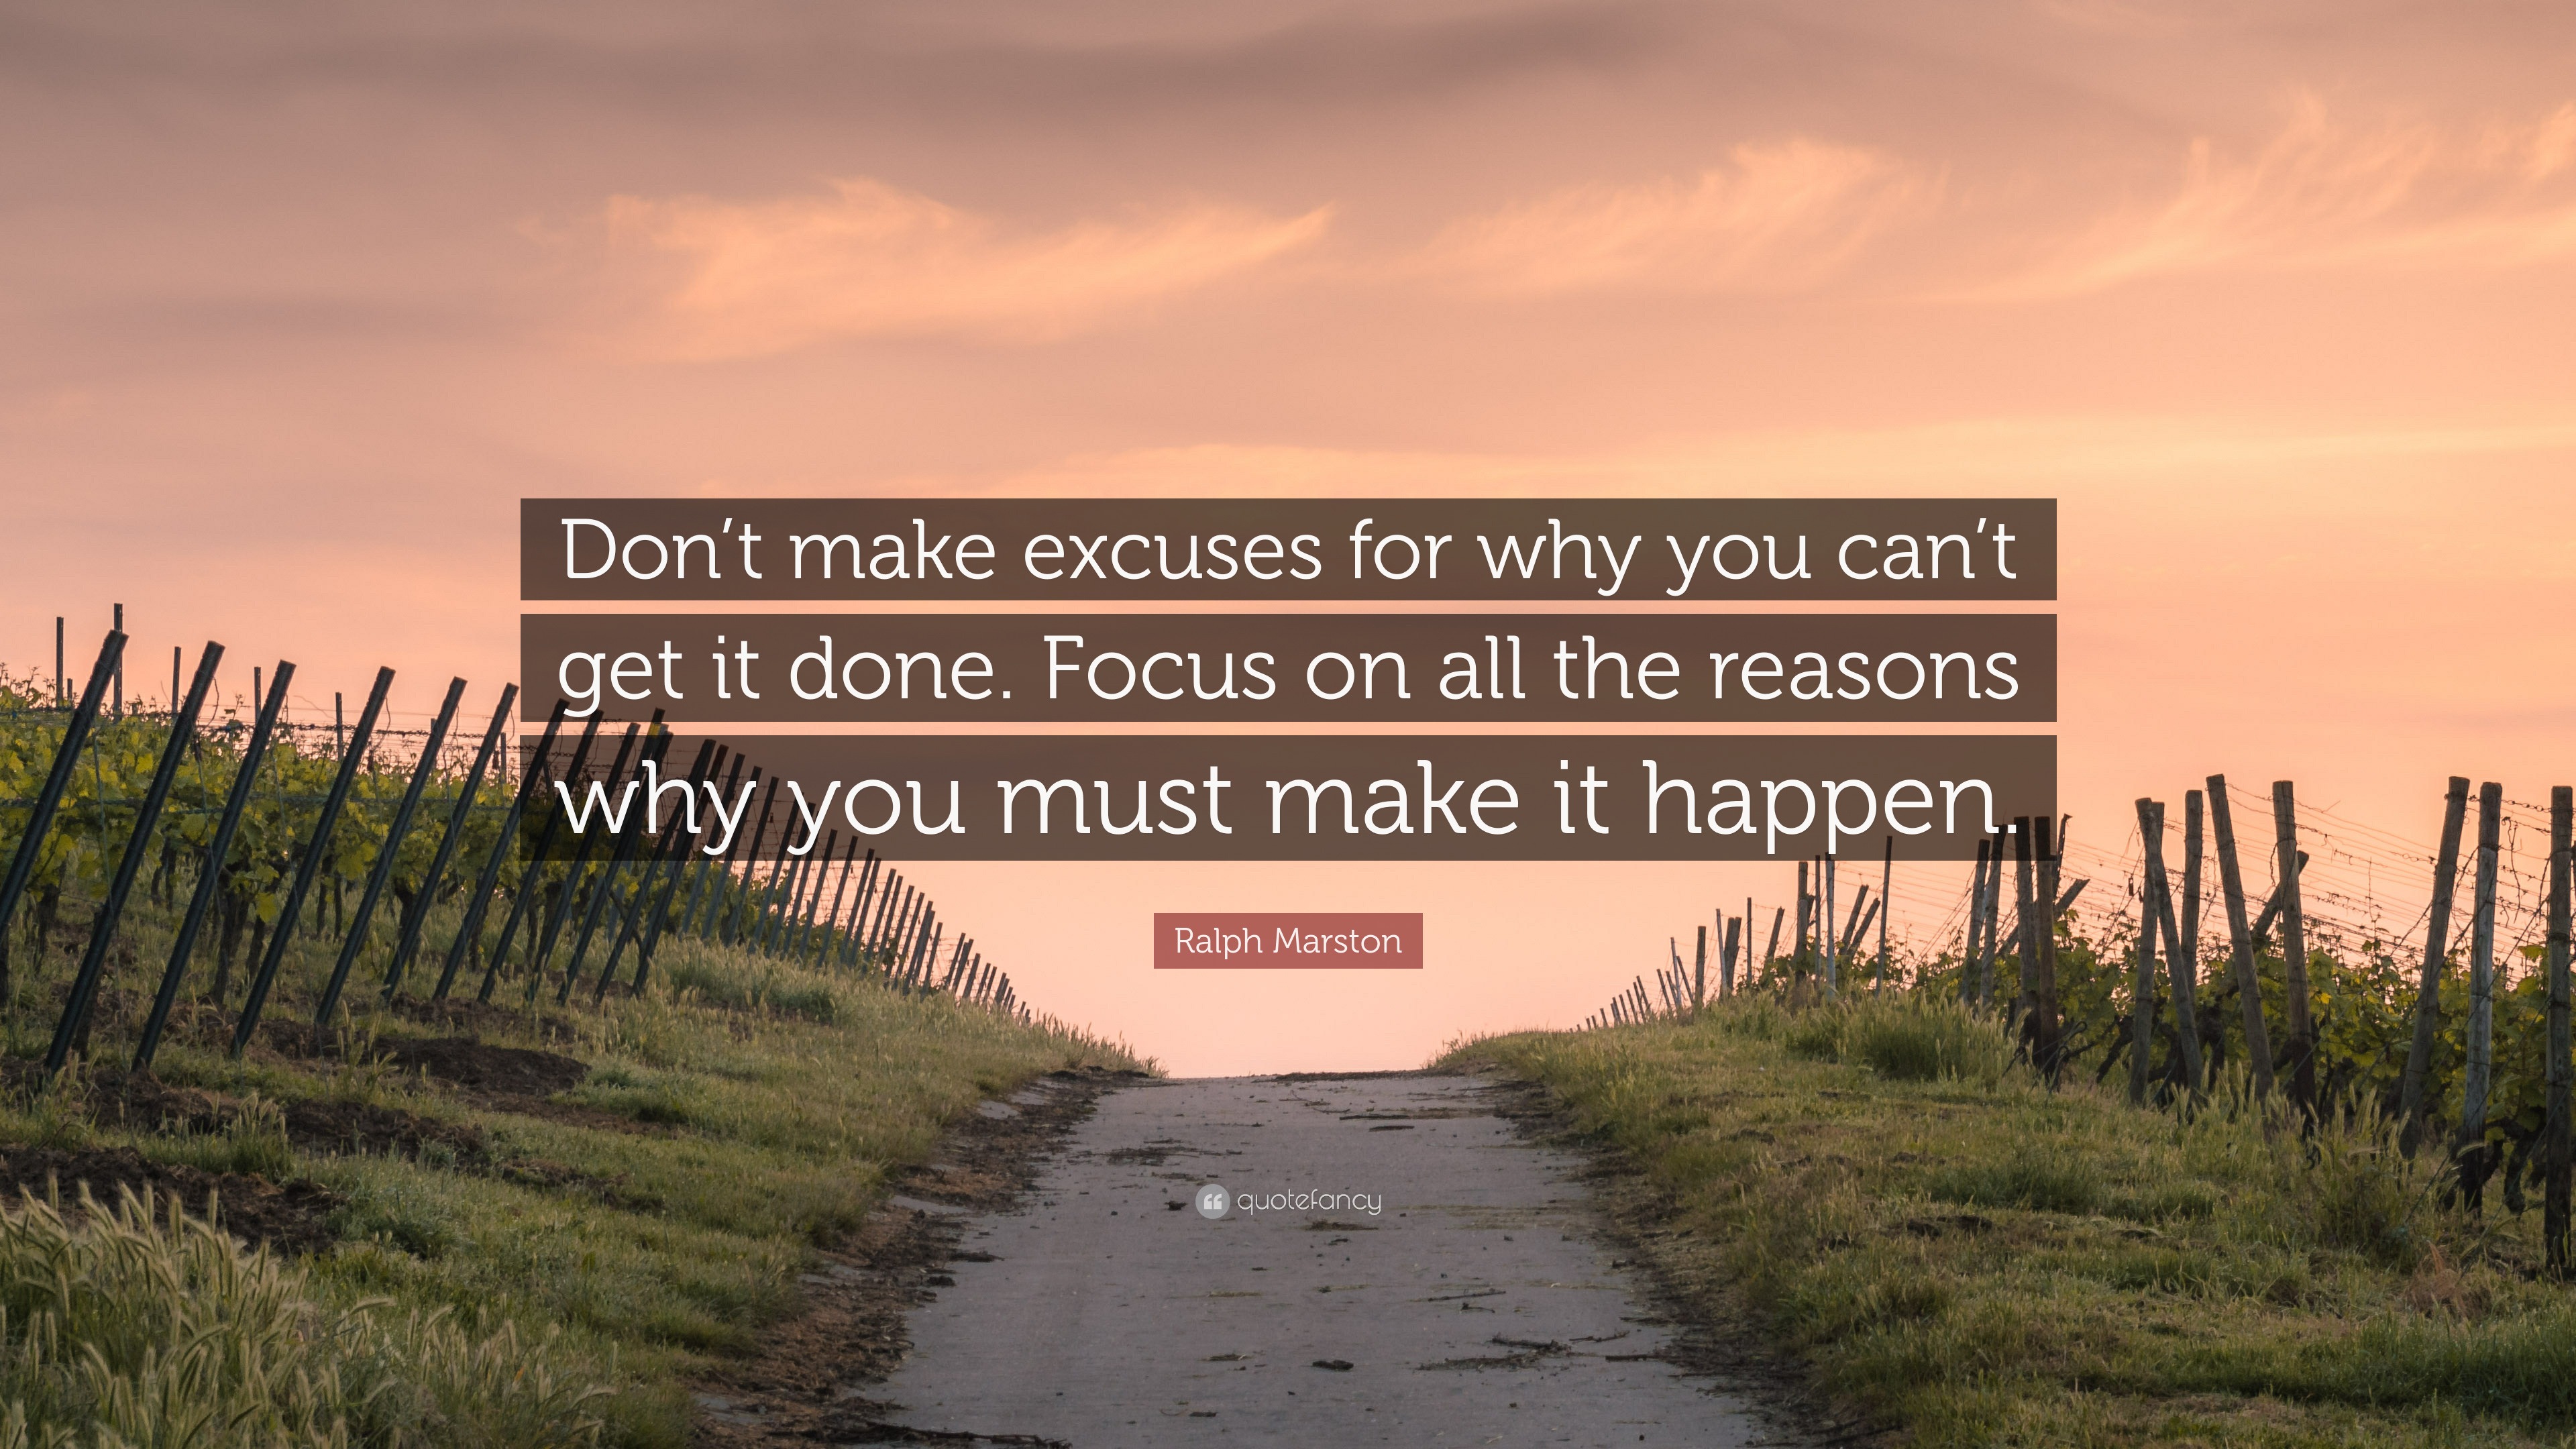 https://quotefancy.com/media/wallpaper/3840x2160/2039846-Ralph-Marston-Quote-Don-t-make-excuses-for-why-you-can-t-get-it.jpg